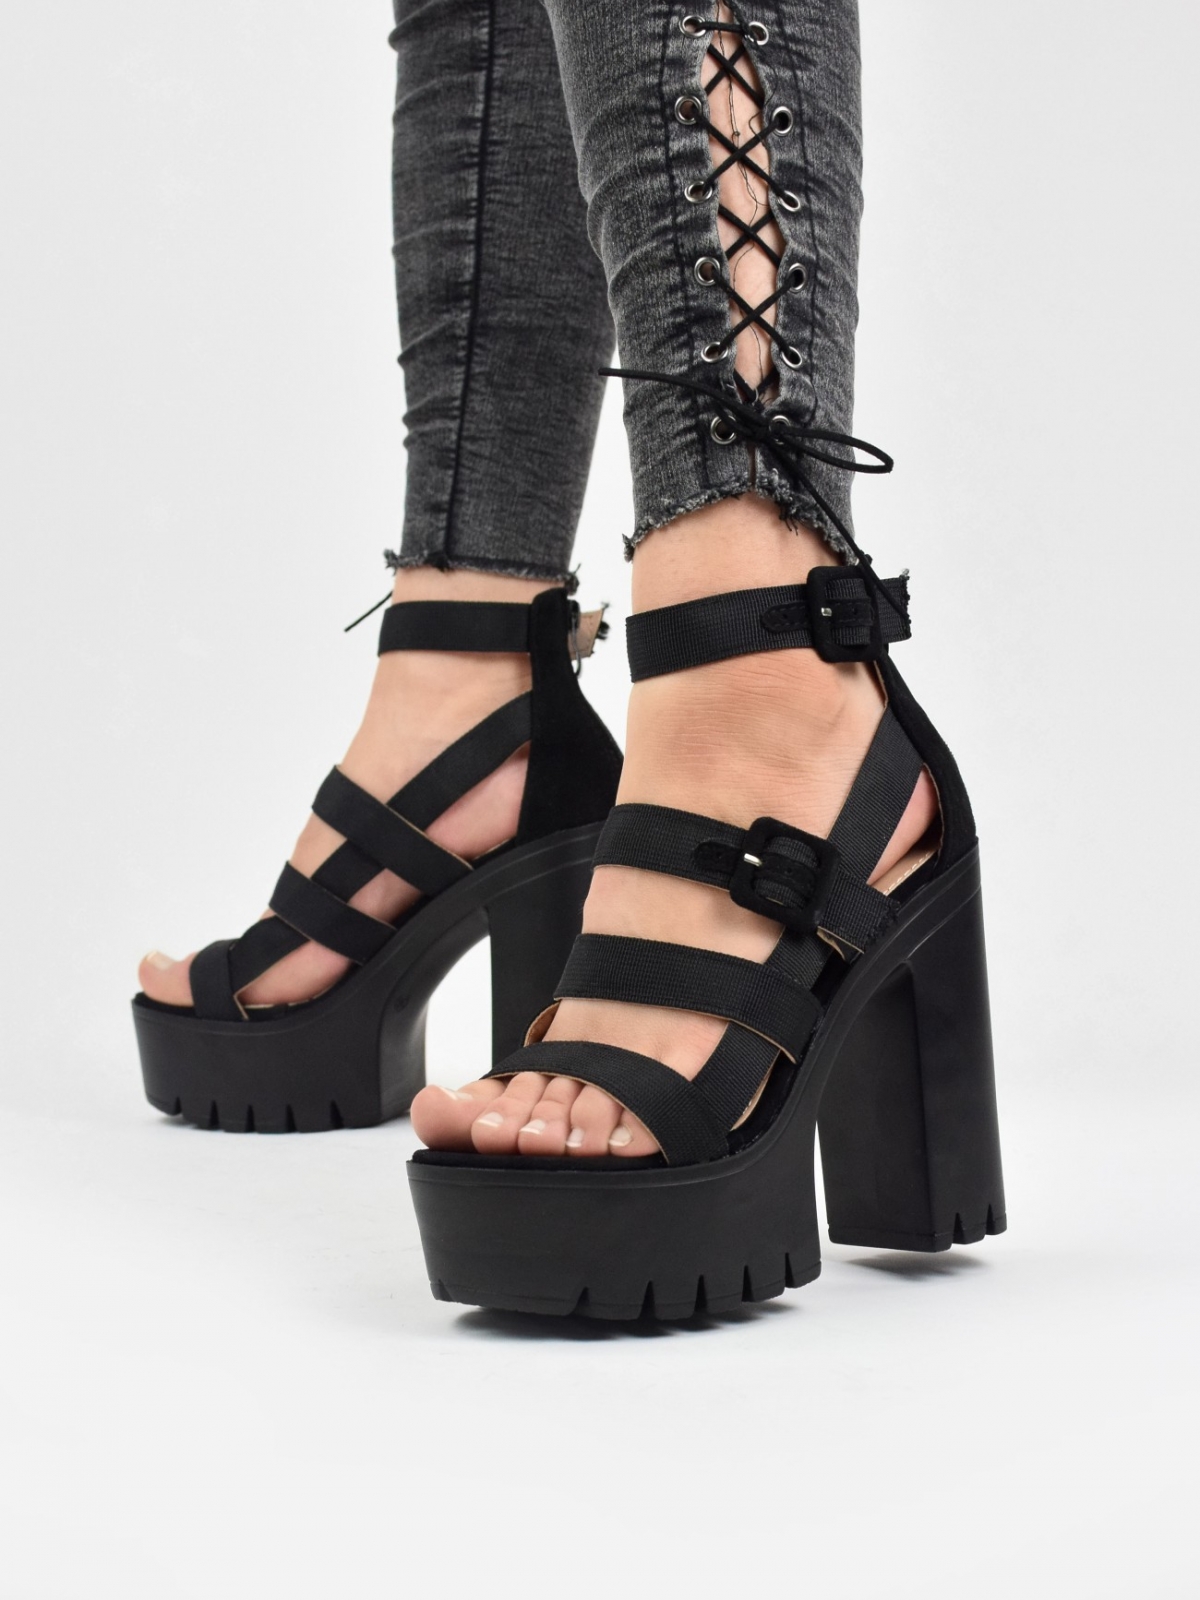 High heeled sandals with fashionable sole in black